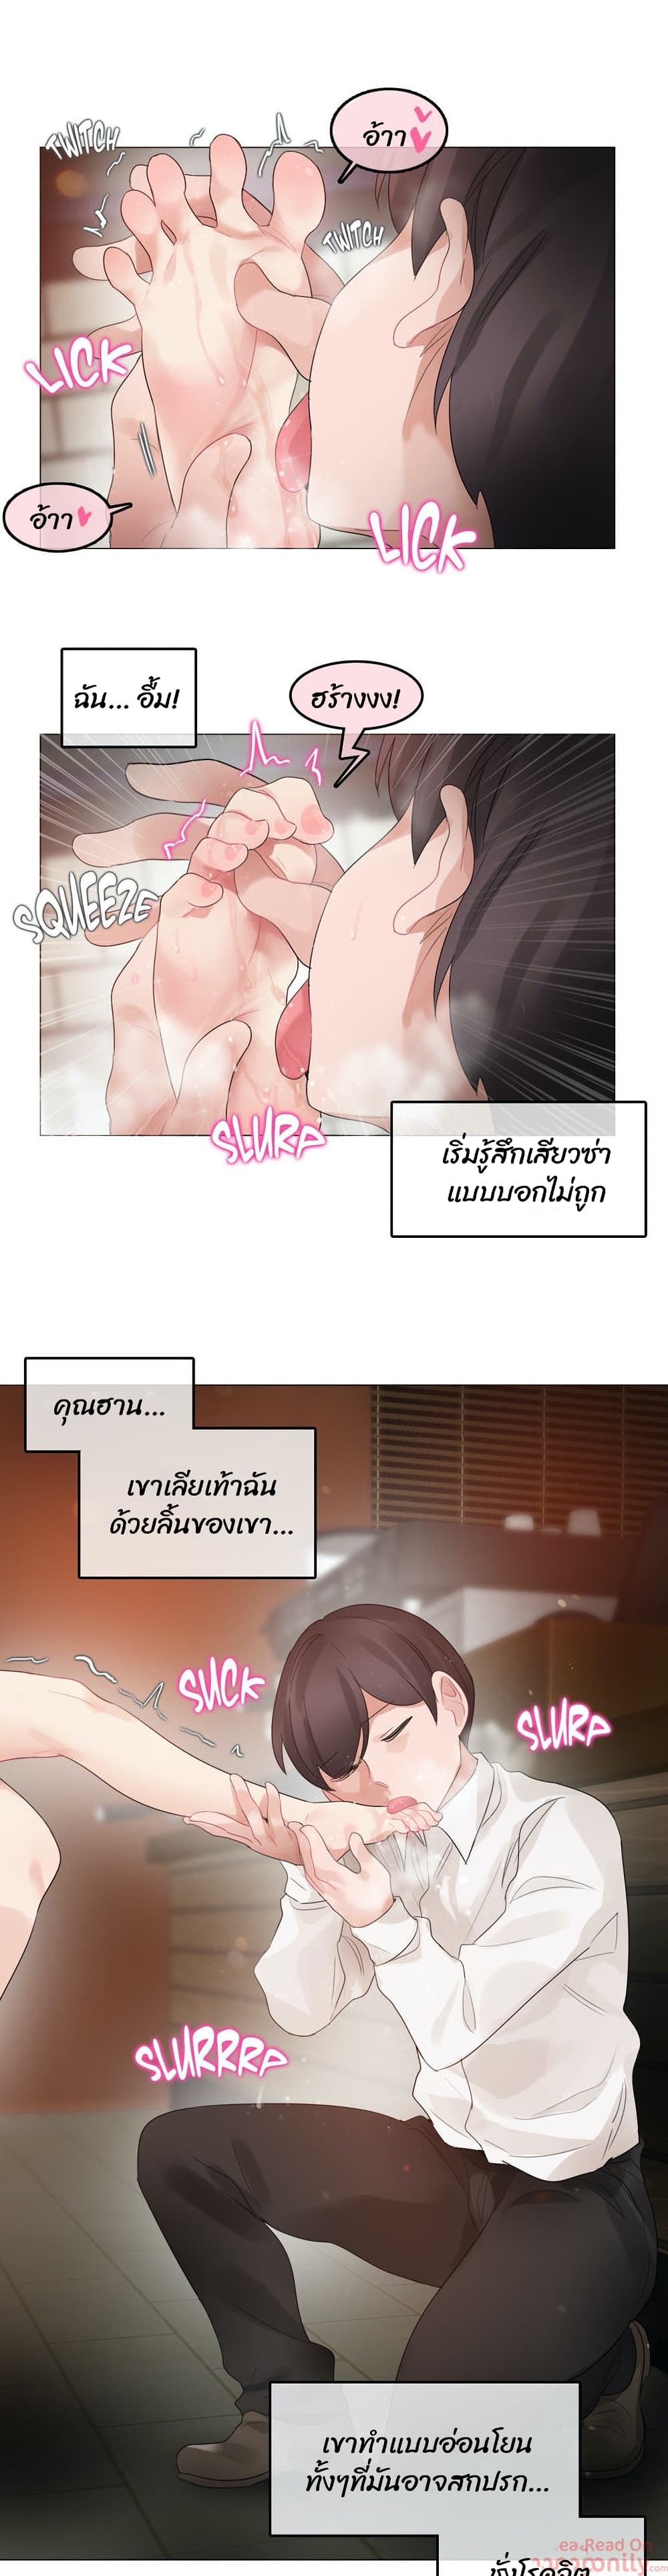 A Pervert's Daily Life 85 (11)